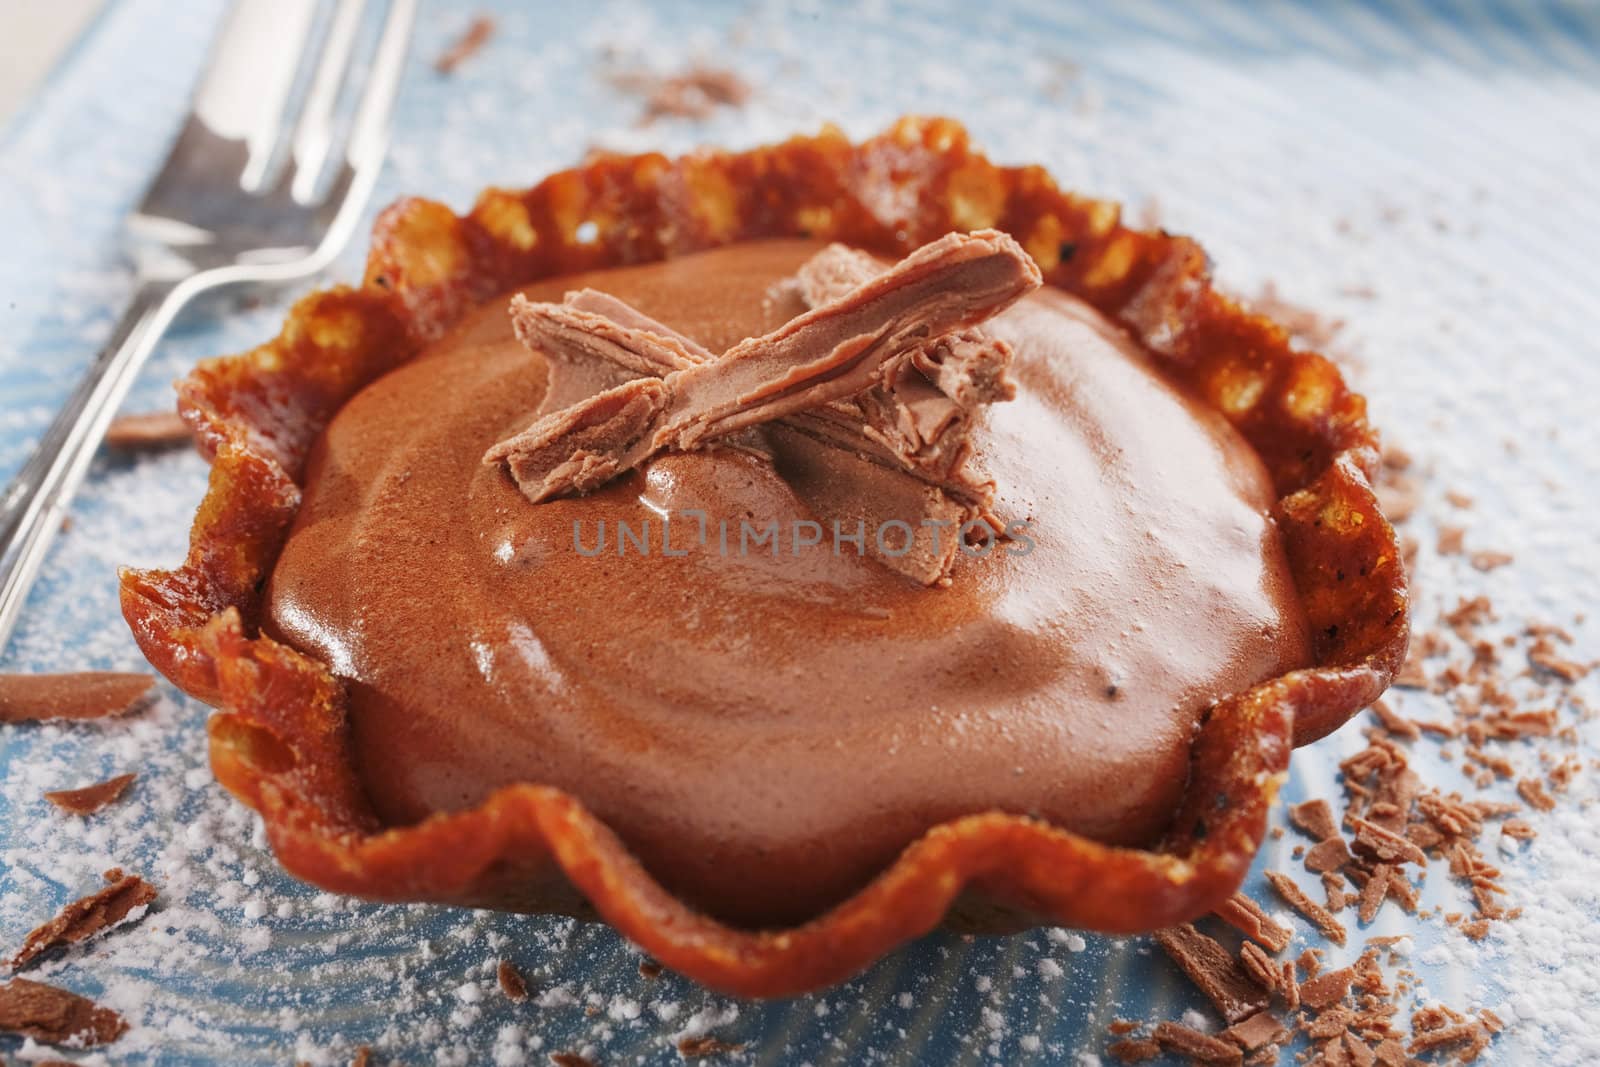 A brandy snap basket filled with light and airy chocolate mousse and topped with chocolate flake.